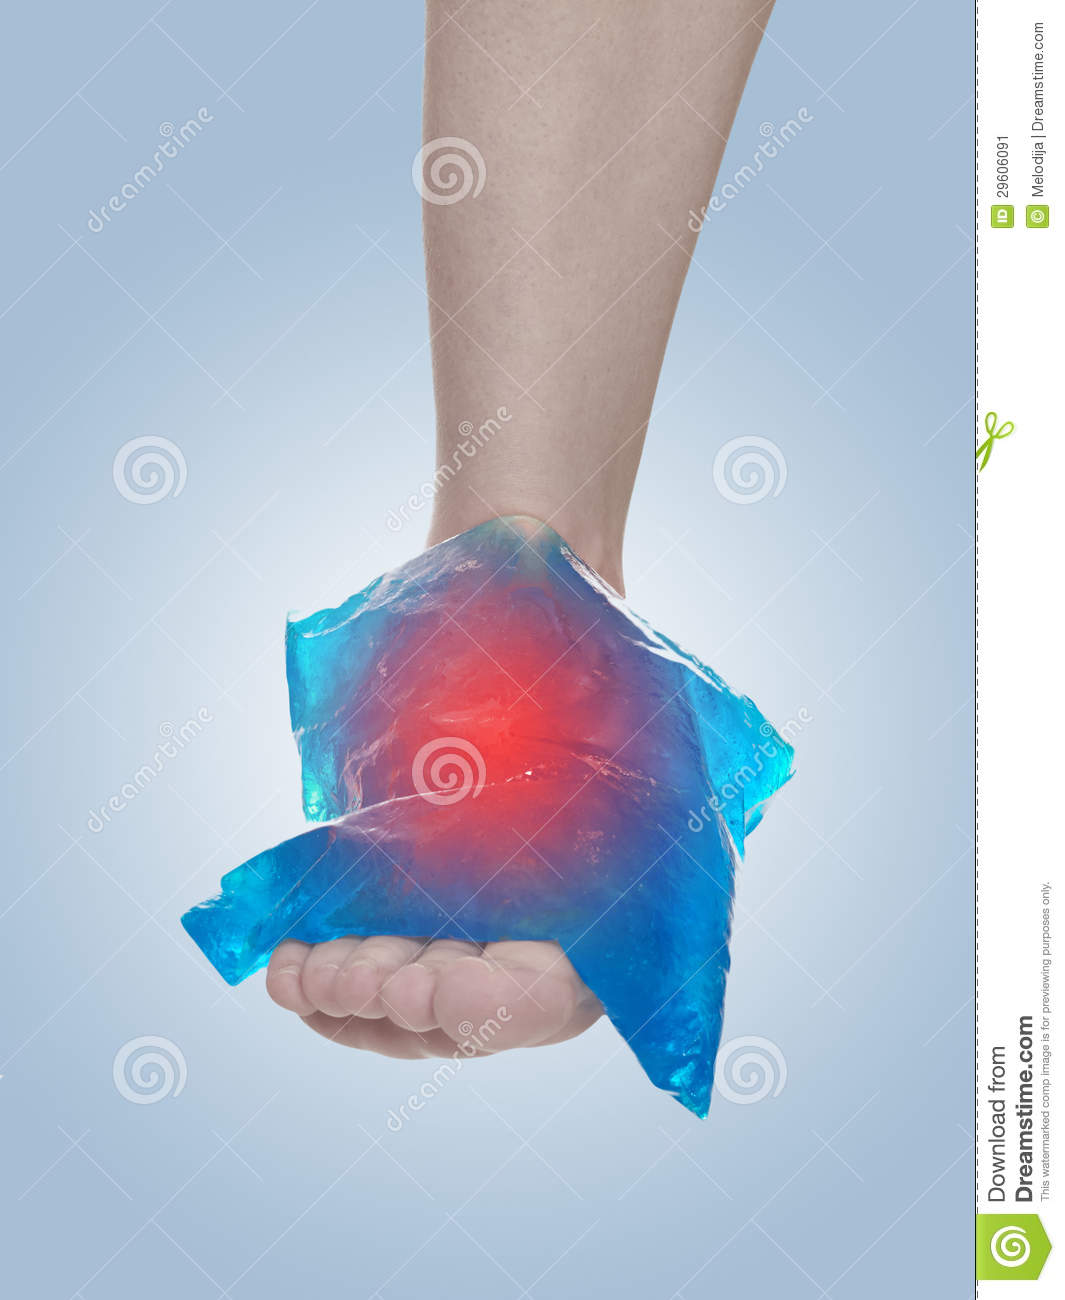 Cool Gel Pack On A Swollen Hurting Ankle Medical Concept Photo